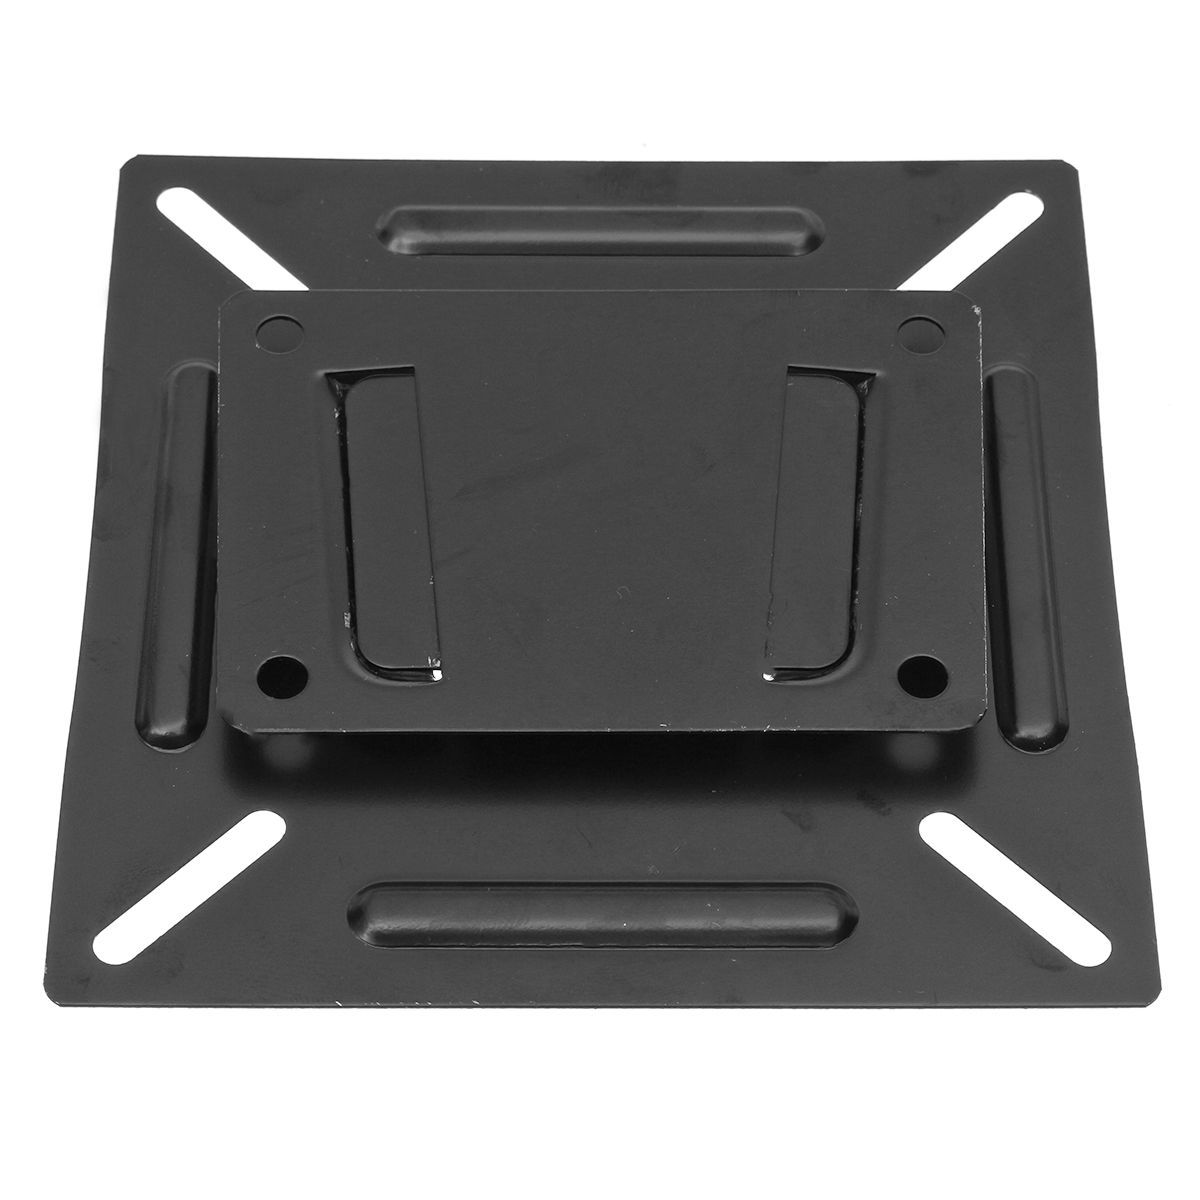 12-24-Inch-LCD-LED-Plasma-Monitor-TV-LCD-Screen-Computer-Wall-Mount-Bracket-TV-Support-1301089